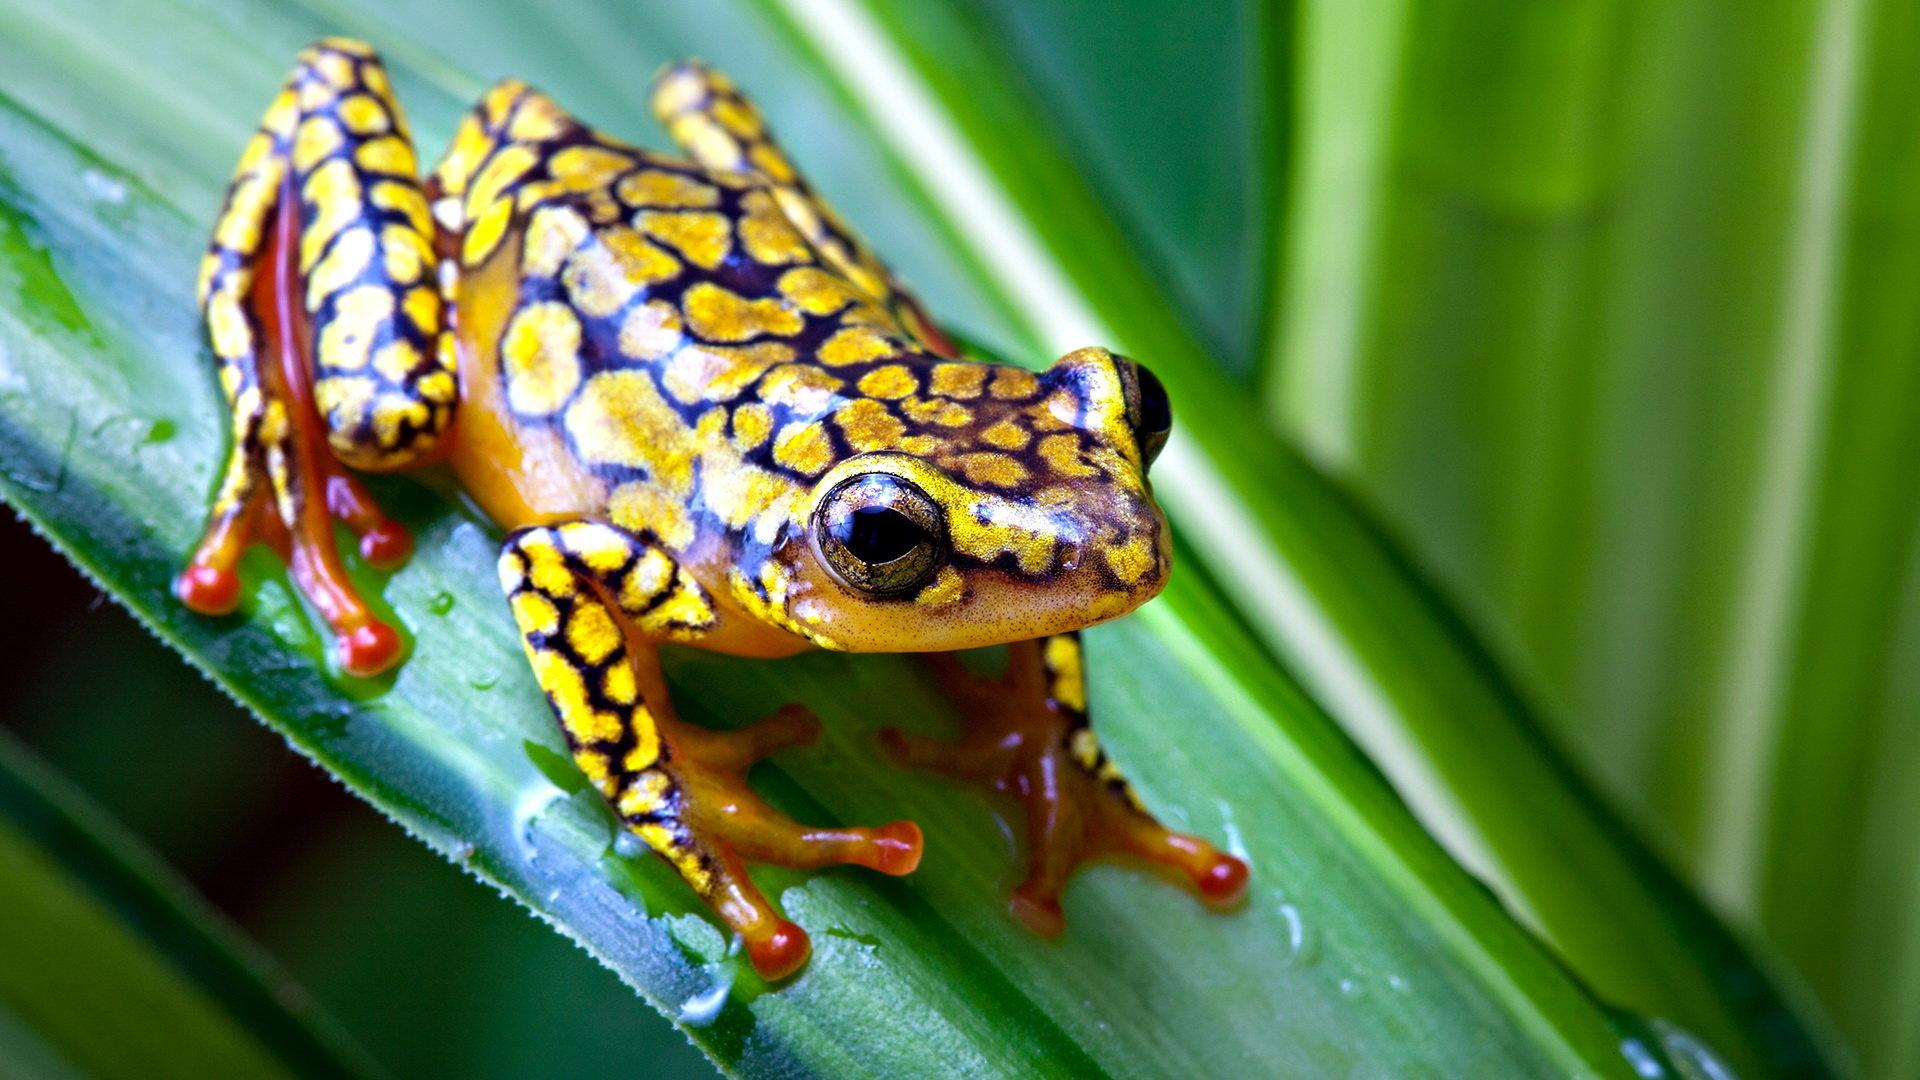 Awesome Poison Dart Frog free wallpaper for HD 1920x1080